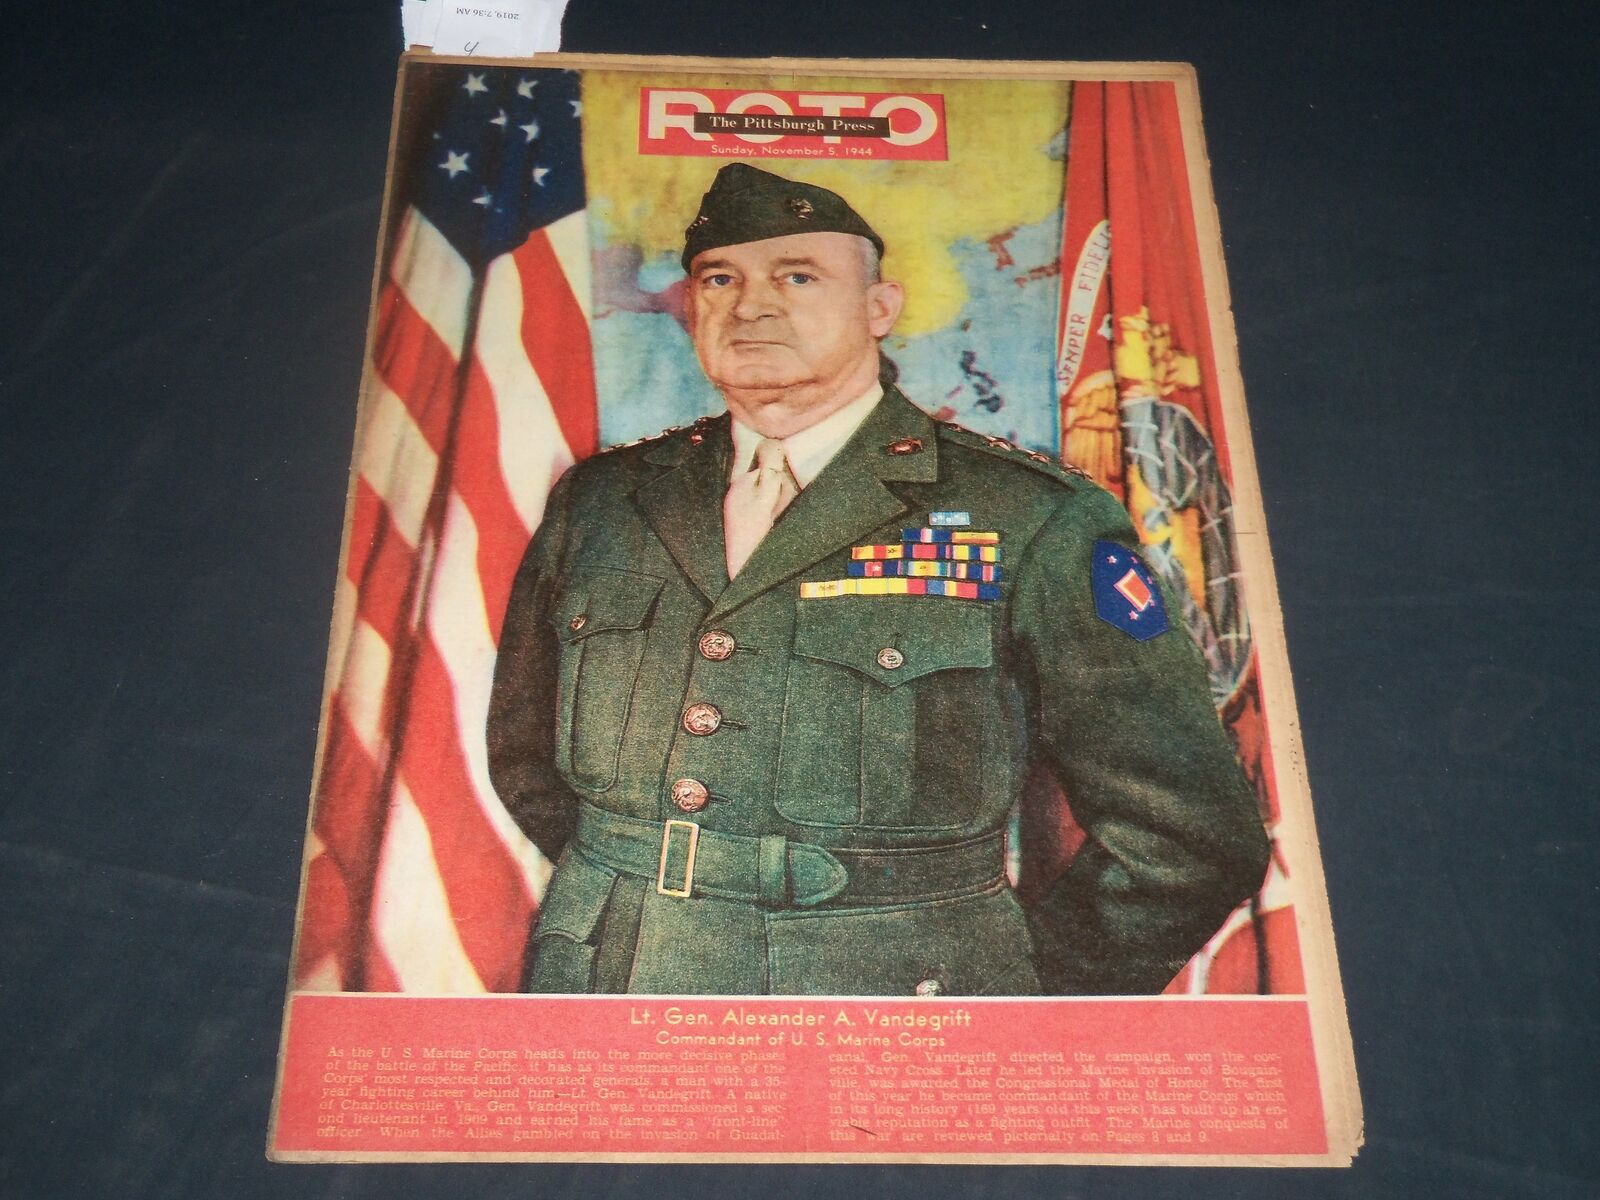 1944 NOV 5 THE PITTSBURGH PRESS SUNDAY ROTO SECTION - GEN. VANDEGRIFT - NP 4600